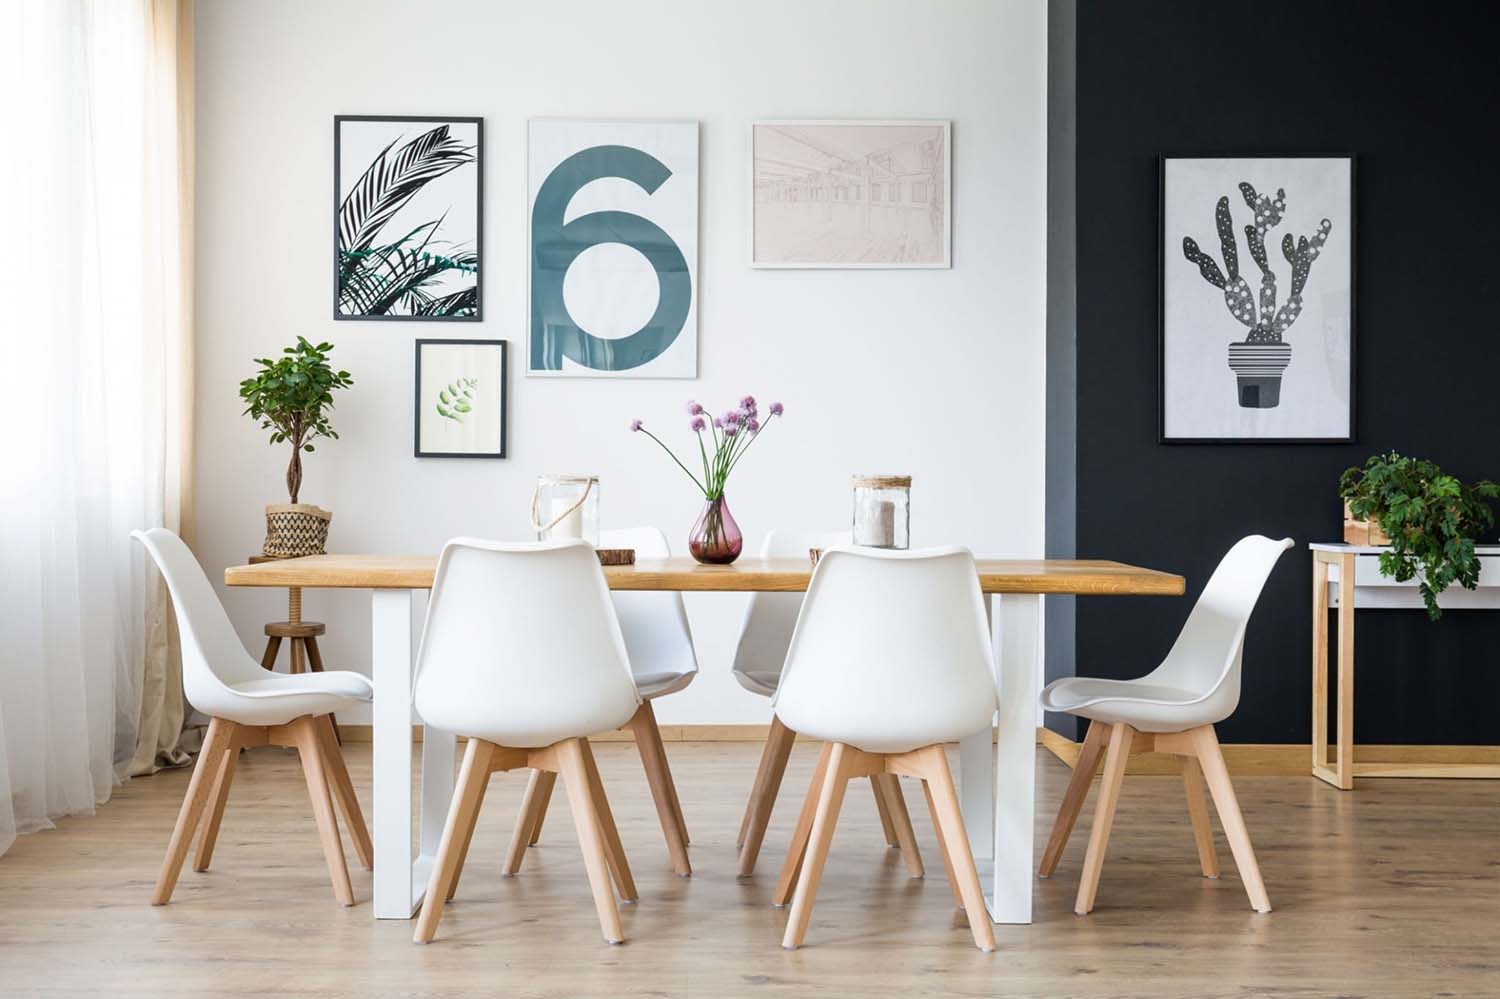 Dining Room Wall Art: The Process of Choosing Art for Your Home